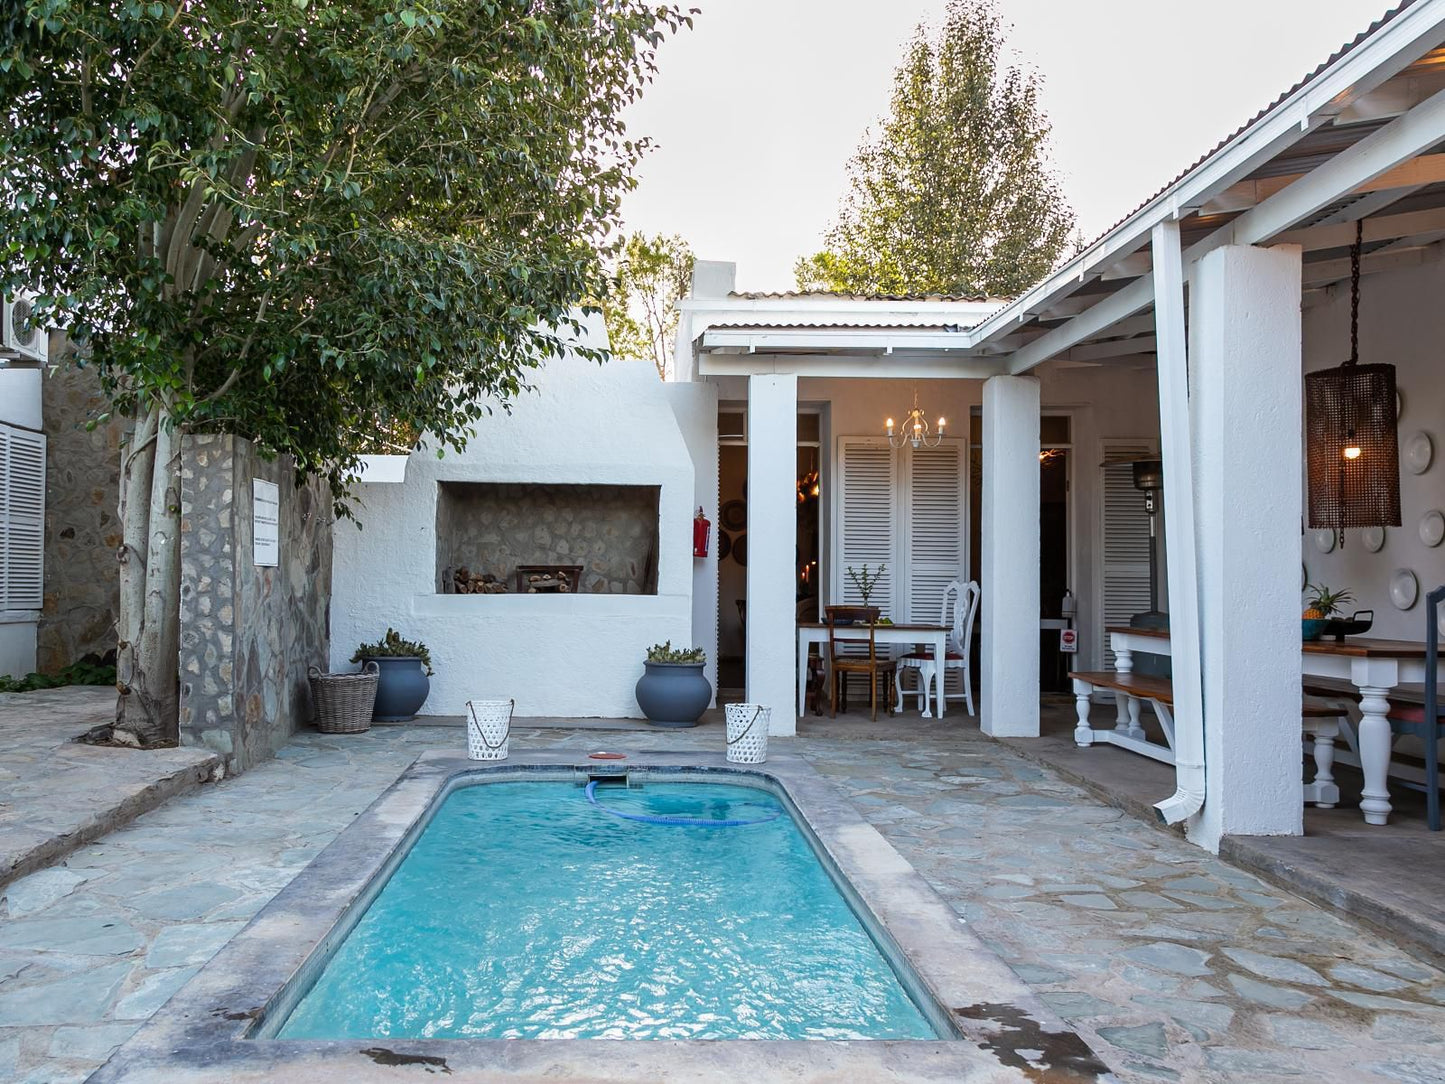 Boutique Guesthouse Hanover Hanover Northern Cape South Africa House, Building, Architecture, Swimming Pool